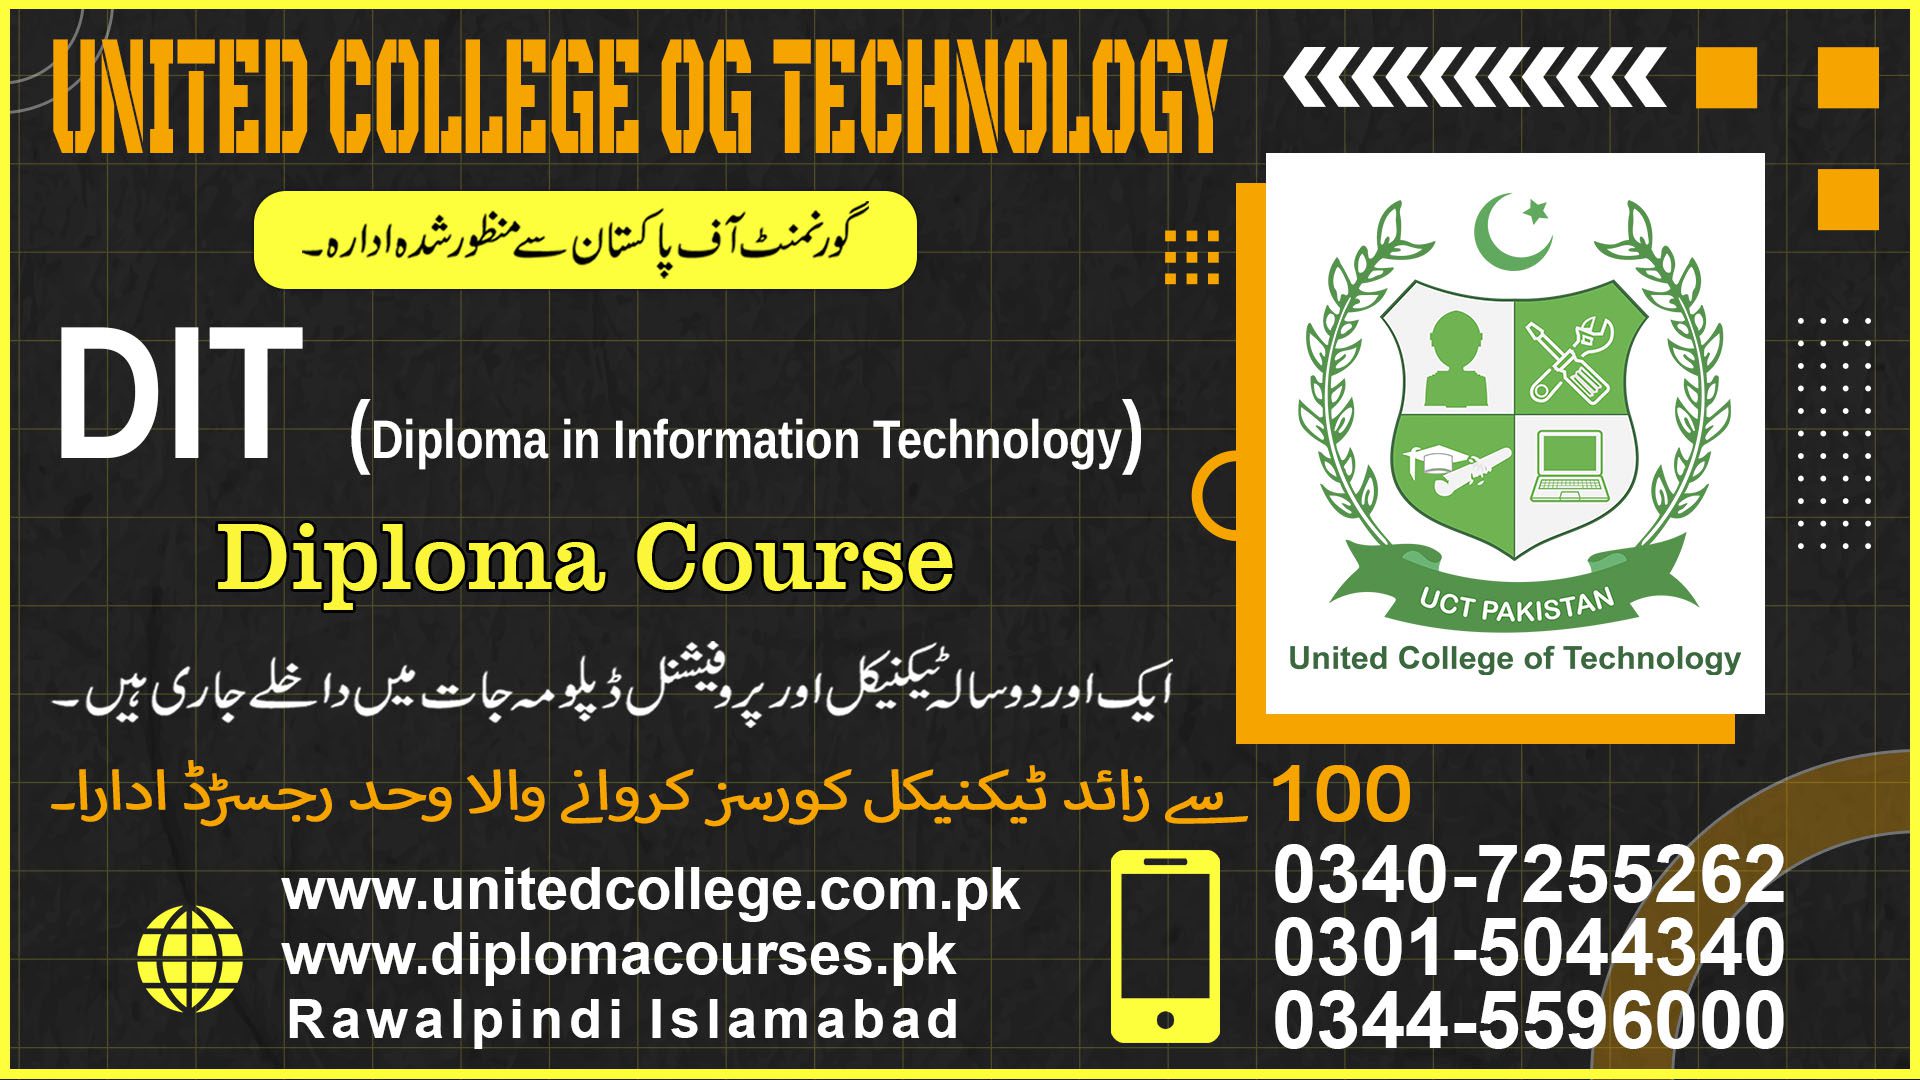 DIT (DIPLOMA IN INFORMATION TECHNOLOGY) COURSE